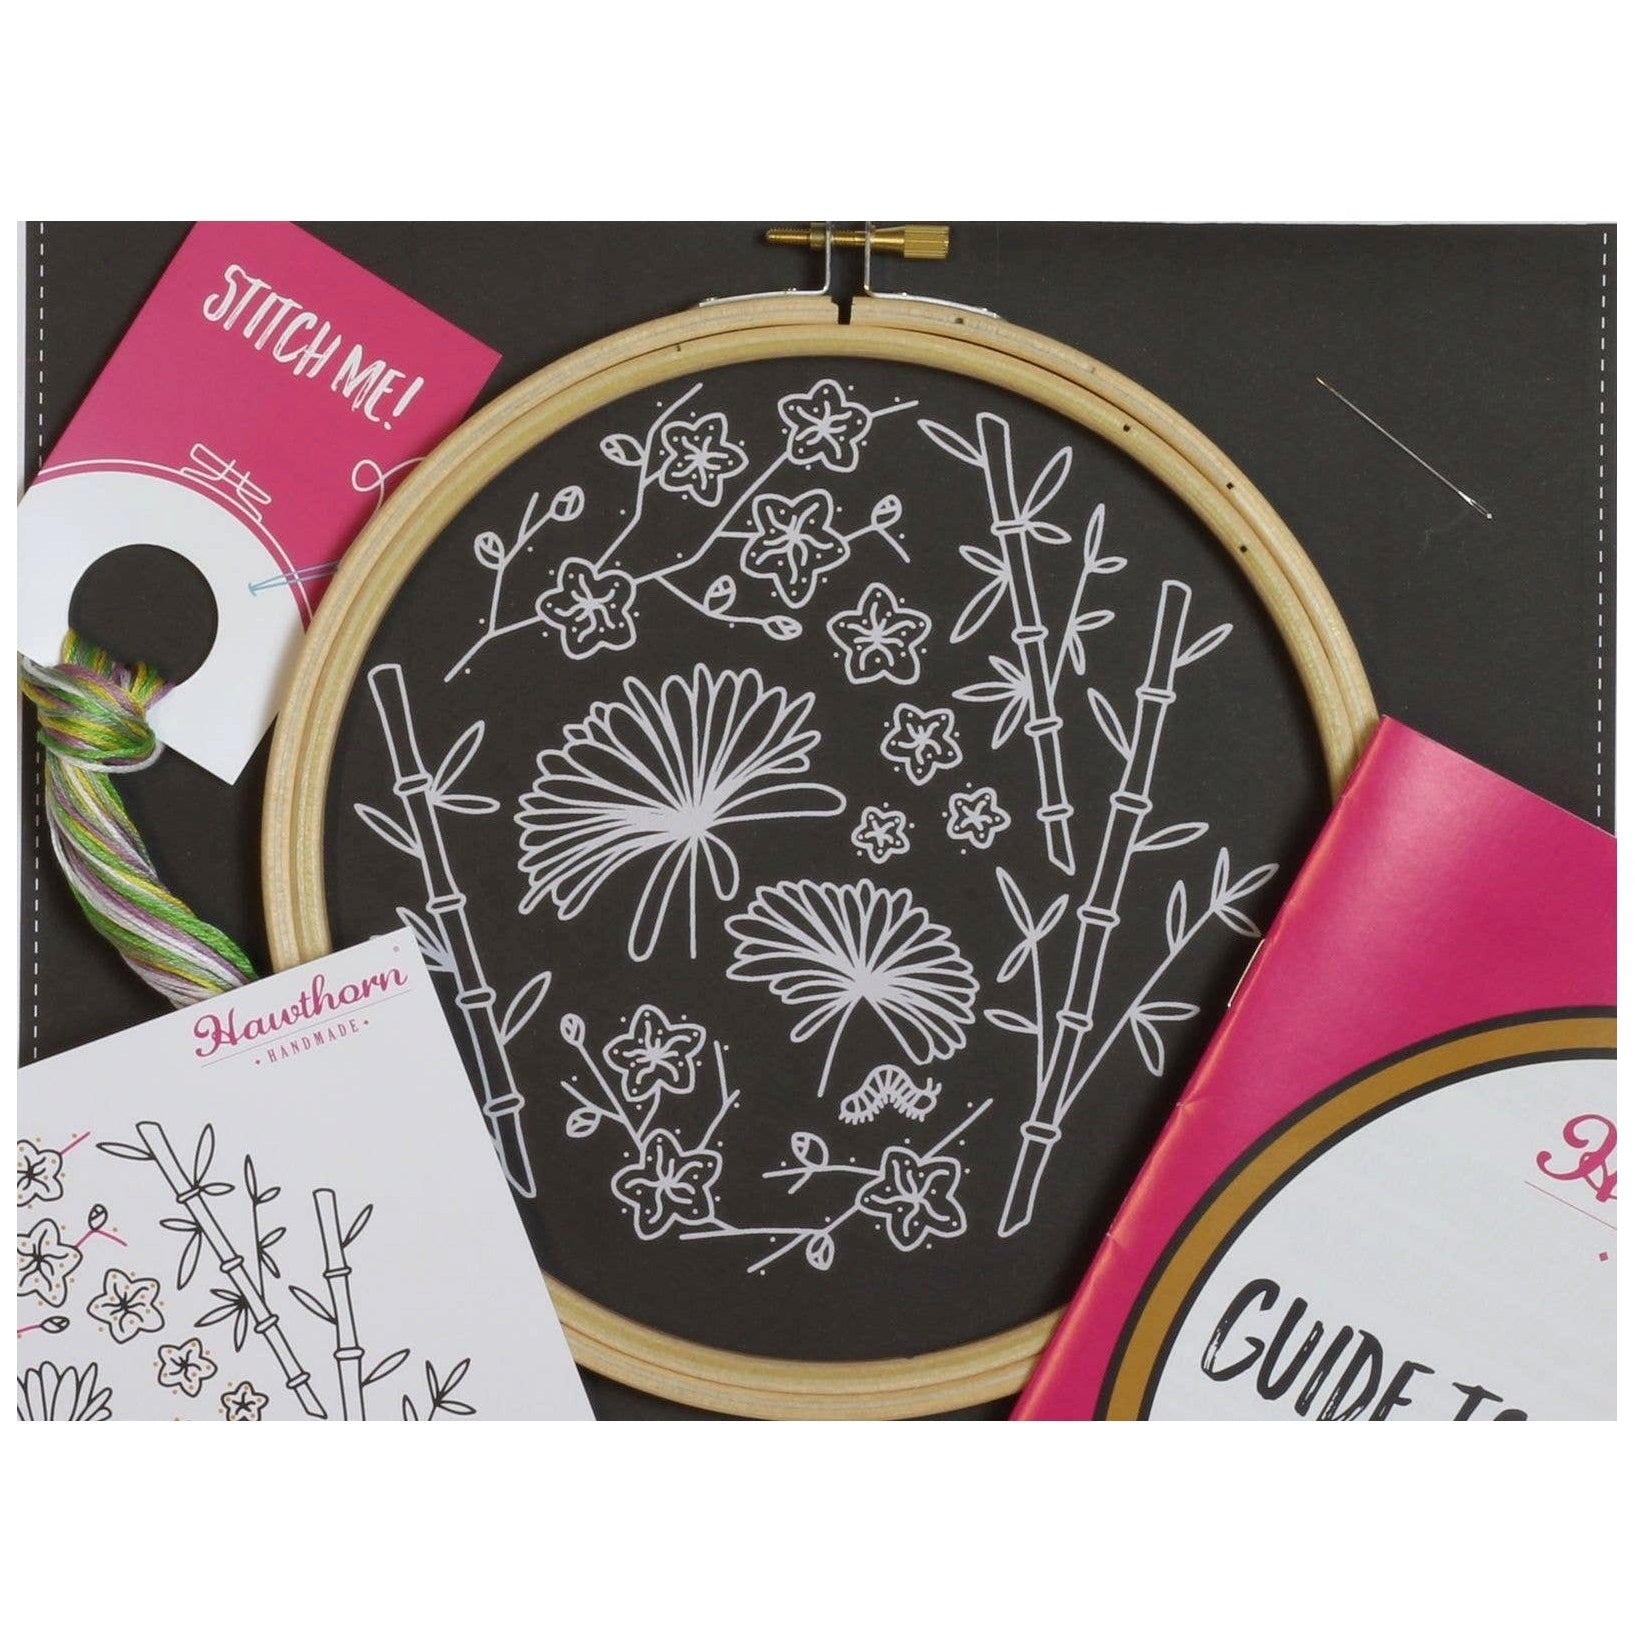 Black Japanese Garden Embroidery Kit | Made in the UK